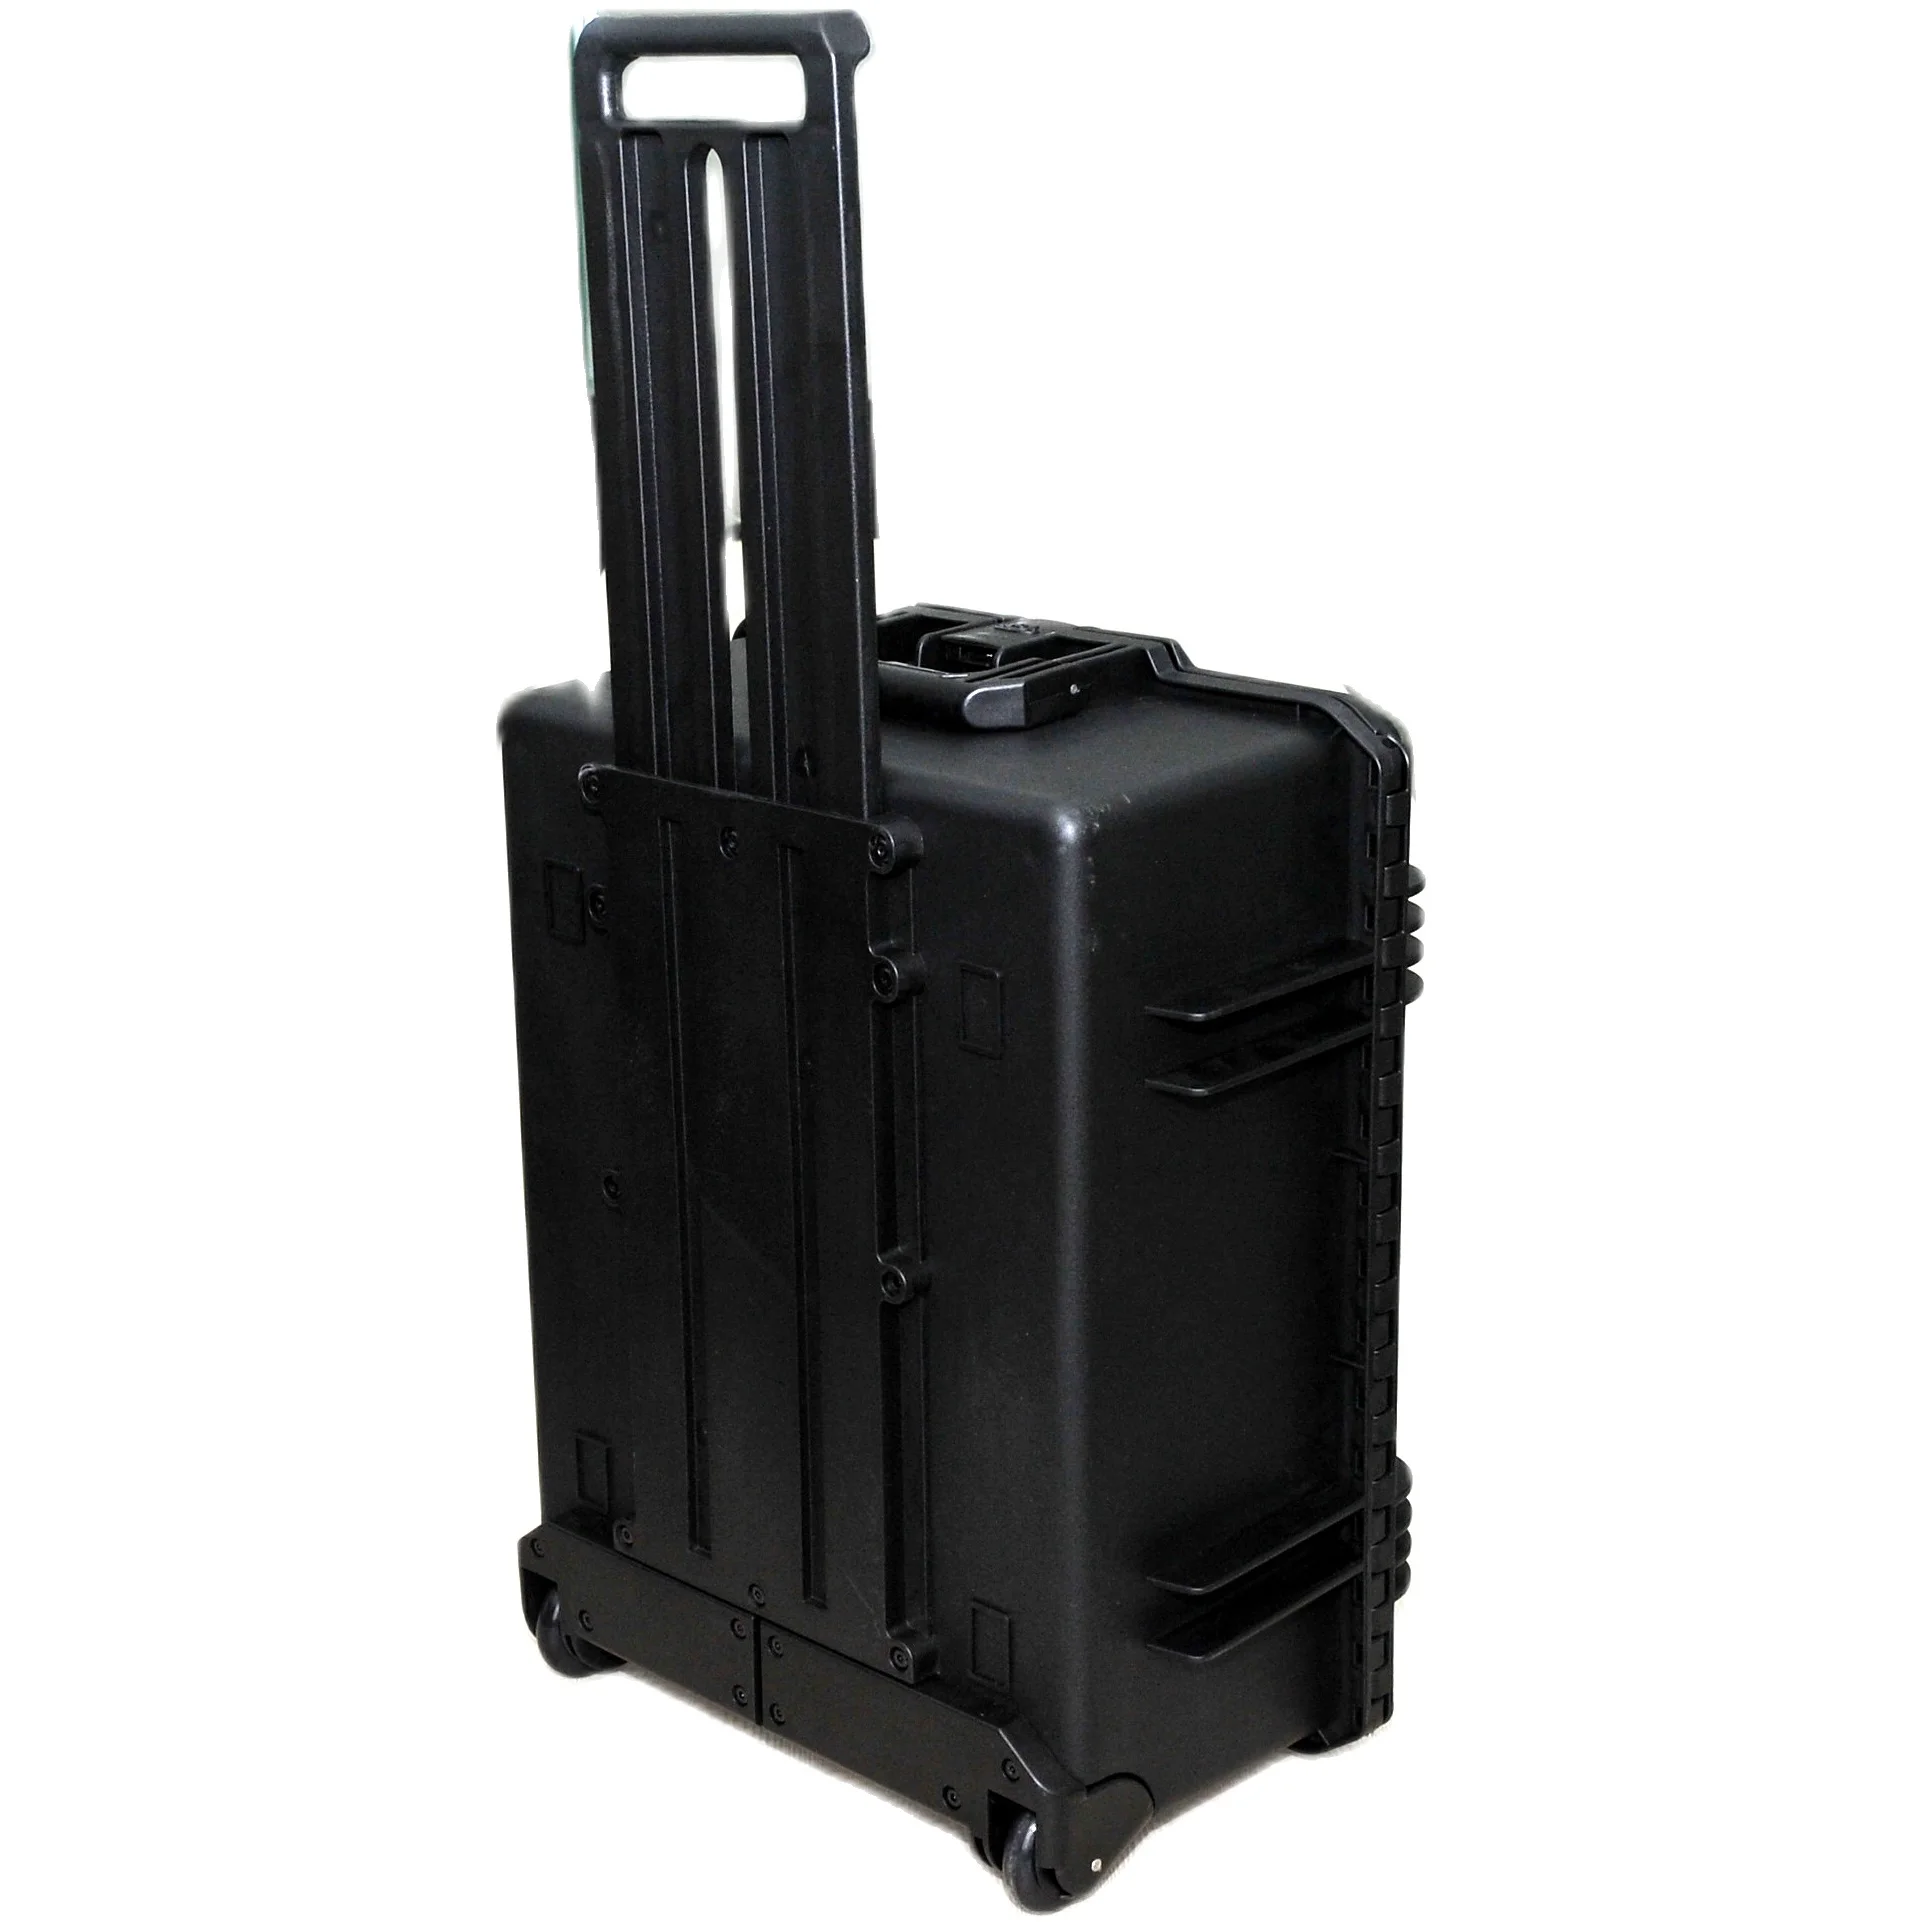 Tricases M2720 luggage Protective plastic case Hard Plastic high quality military suitcase for equipment protective